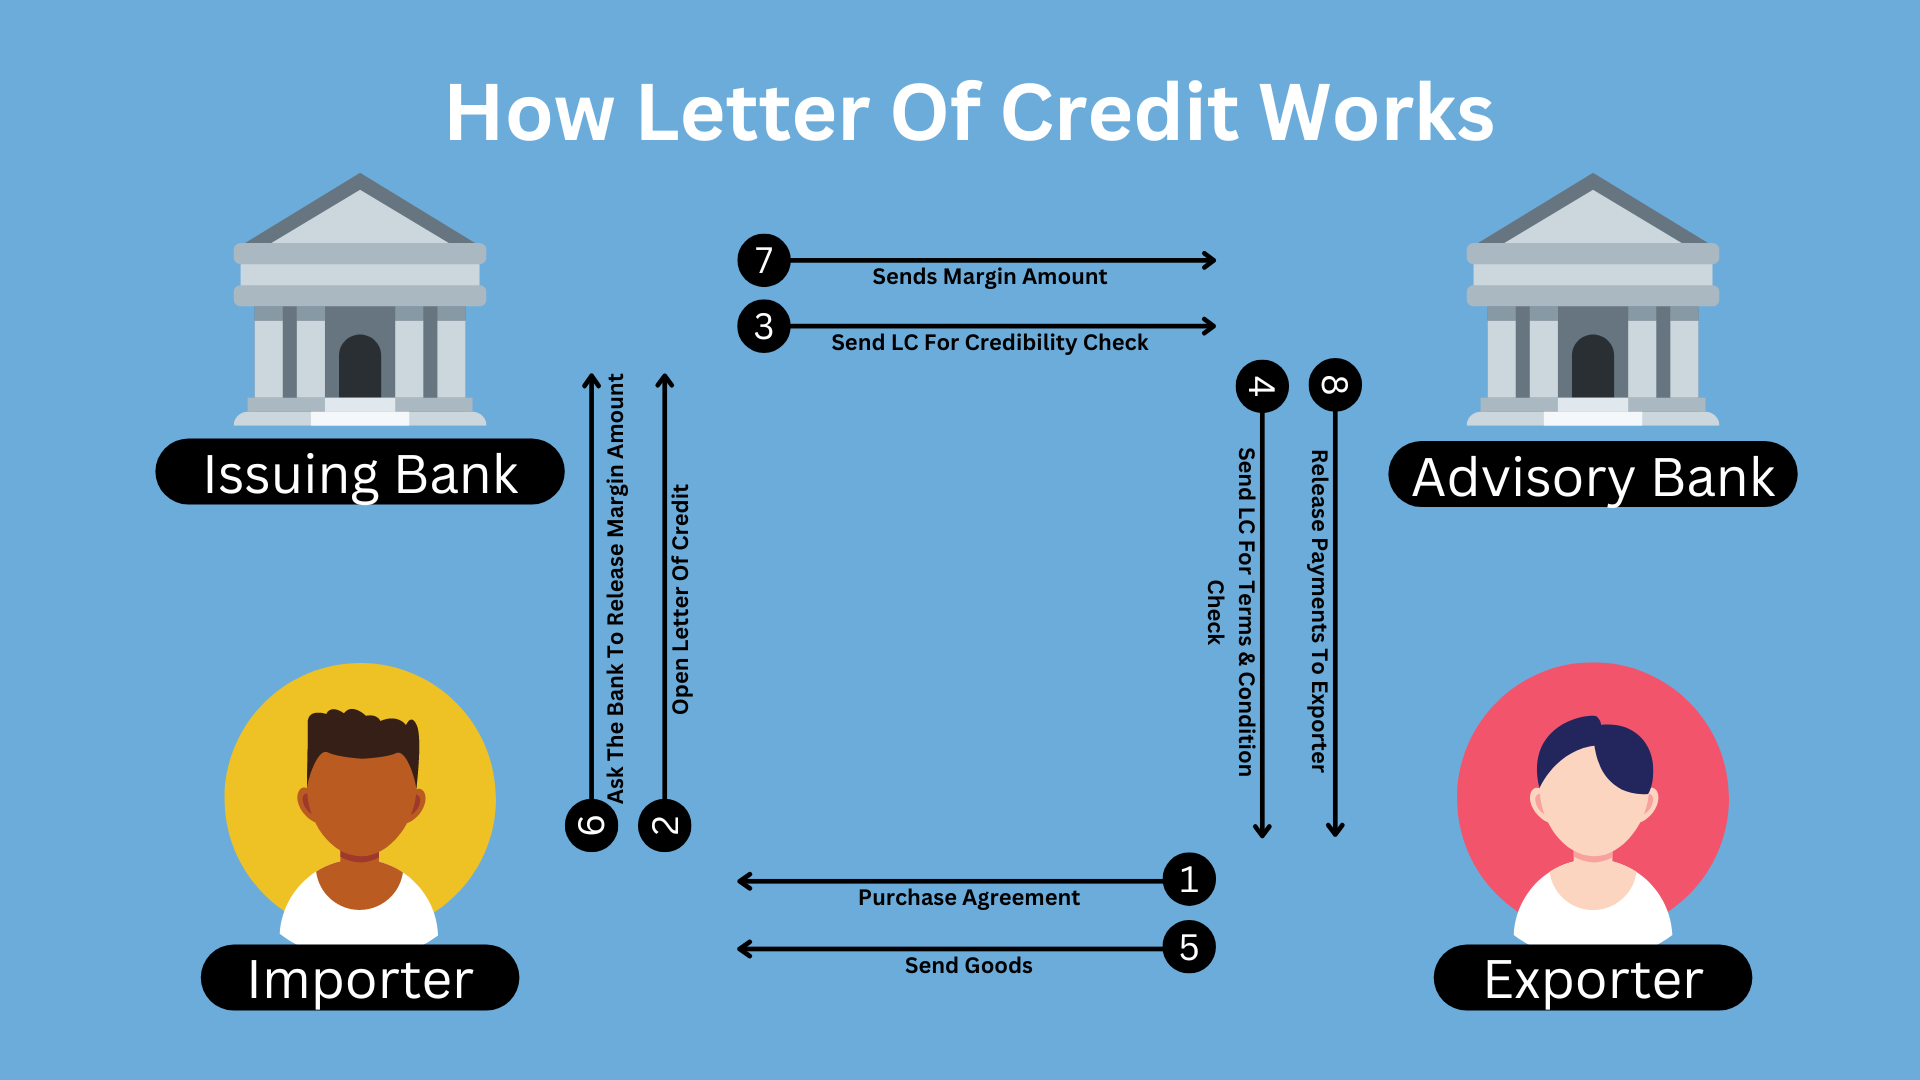 How Letter Of Credit Works?